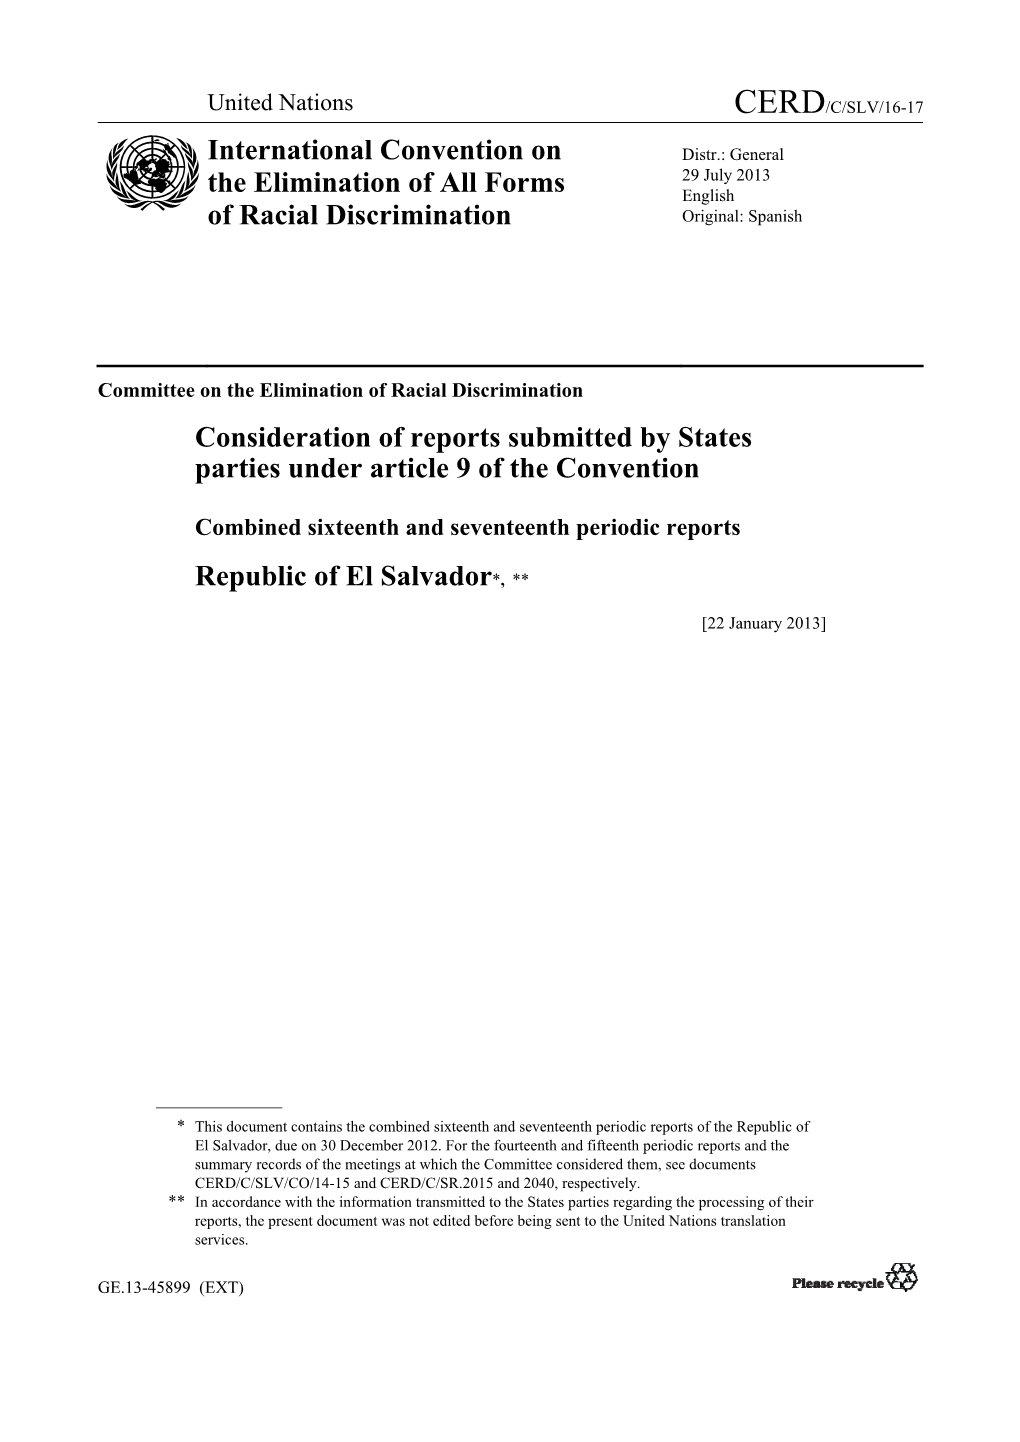 Consideration of Reports Submitted by States Parties Under Article 9 of the Convention